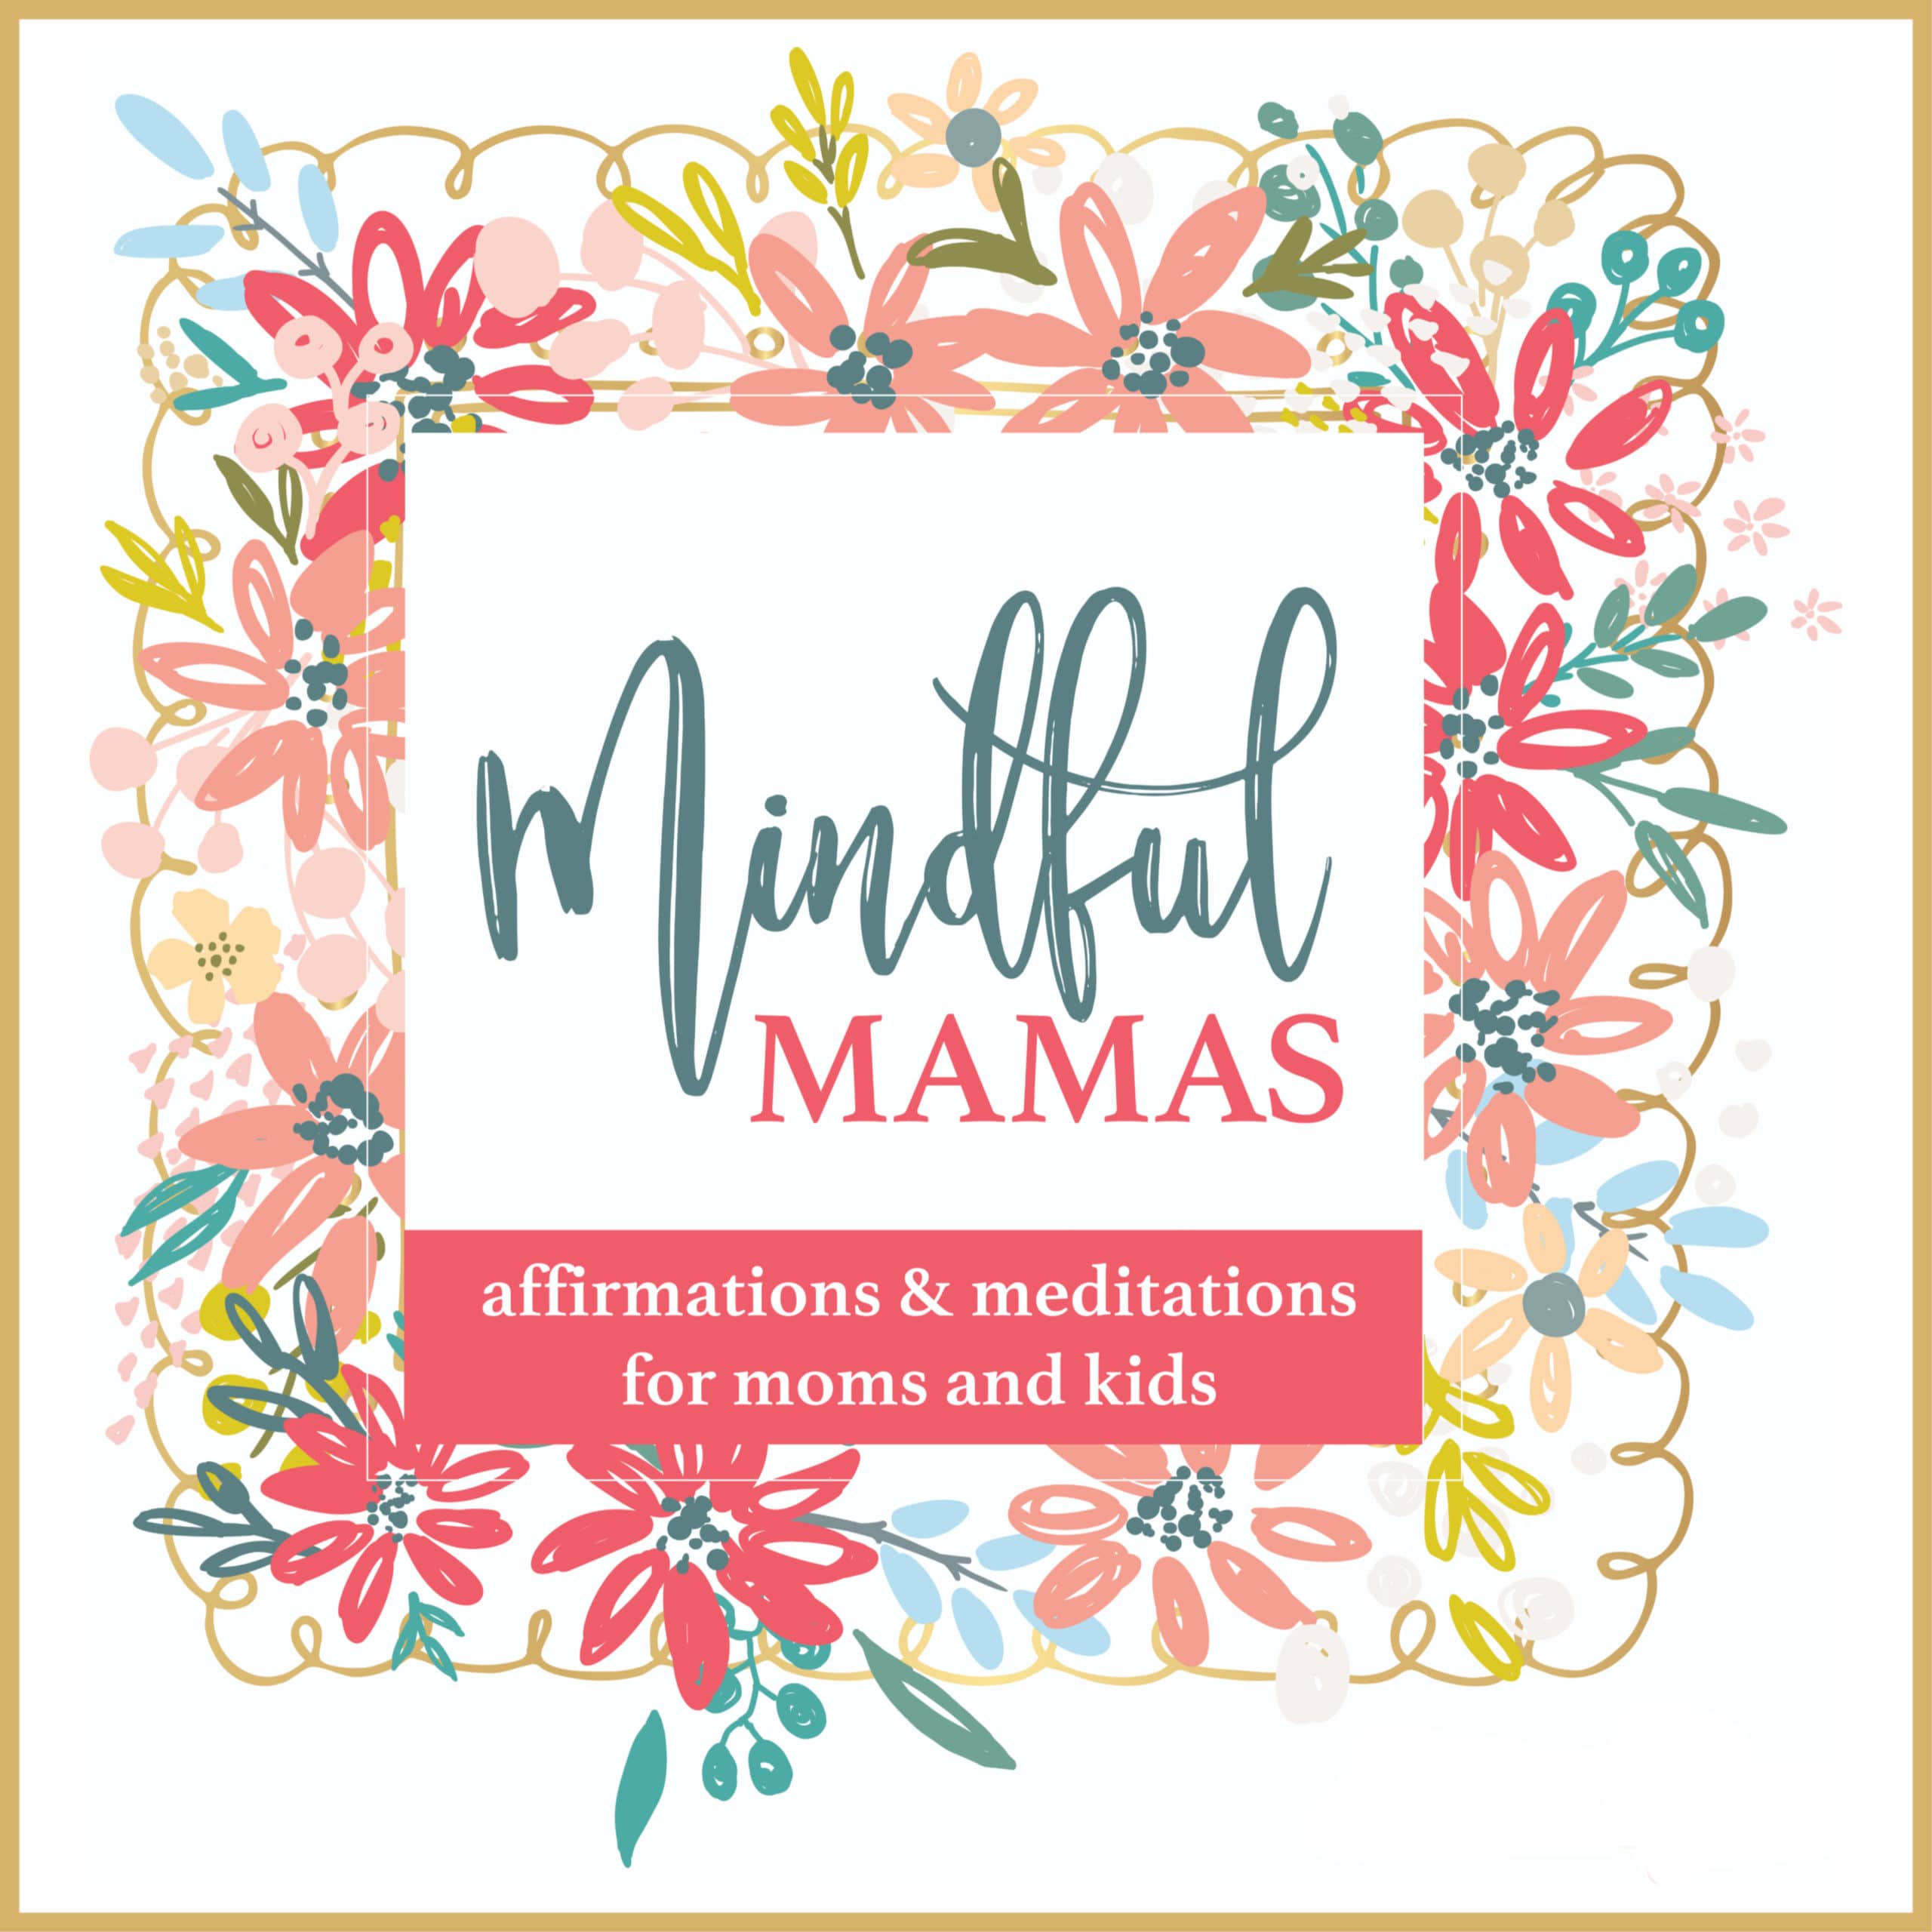 21: Introducing Mindful Mamas – An Affirmations Album for Moms!